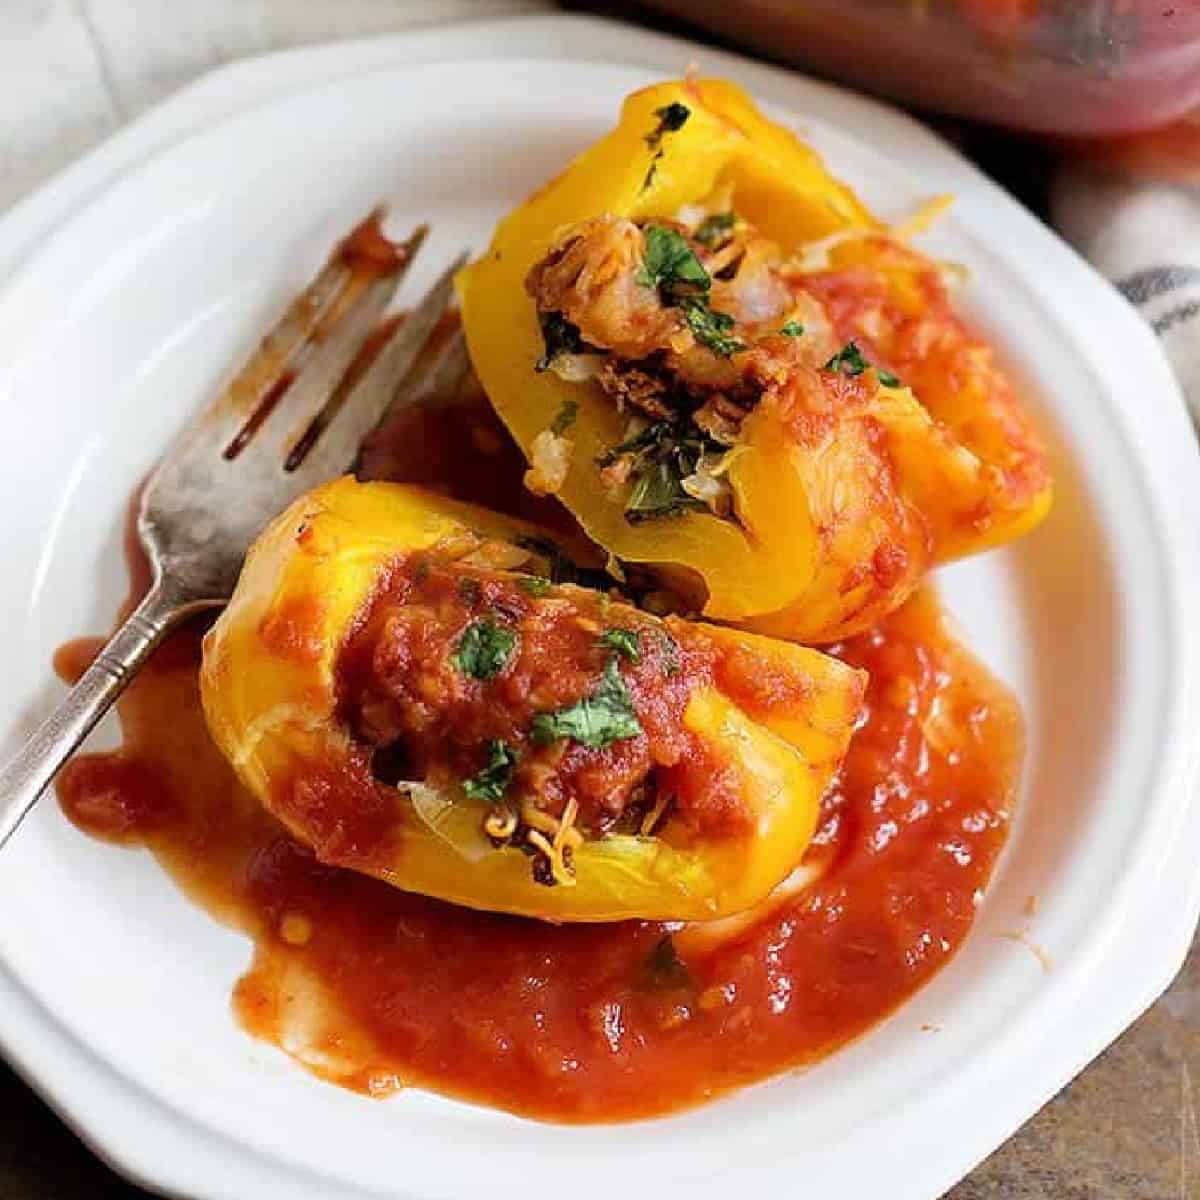 These Spicy Stuffed Peppers are perfect for weeknights. The combination of risotto and chorizo topped with delicious salsa is very tempting!